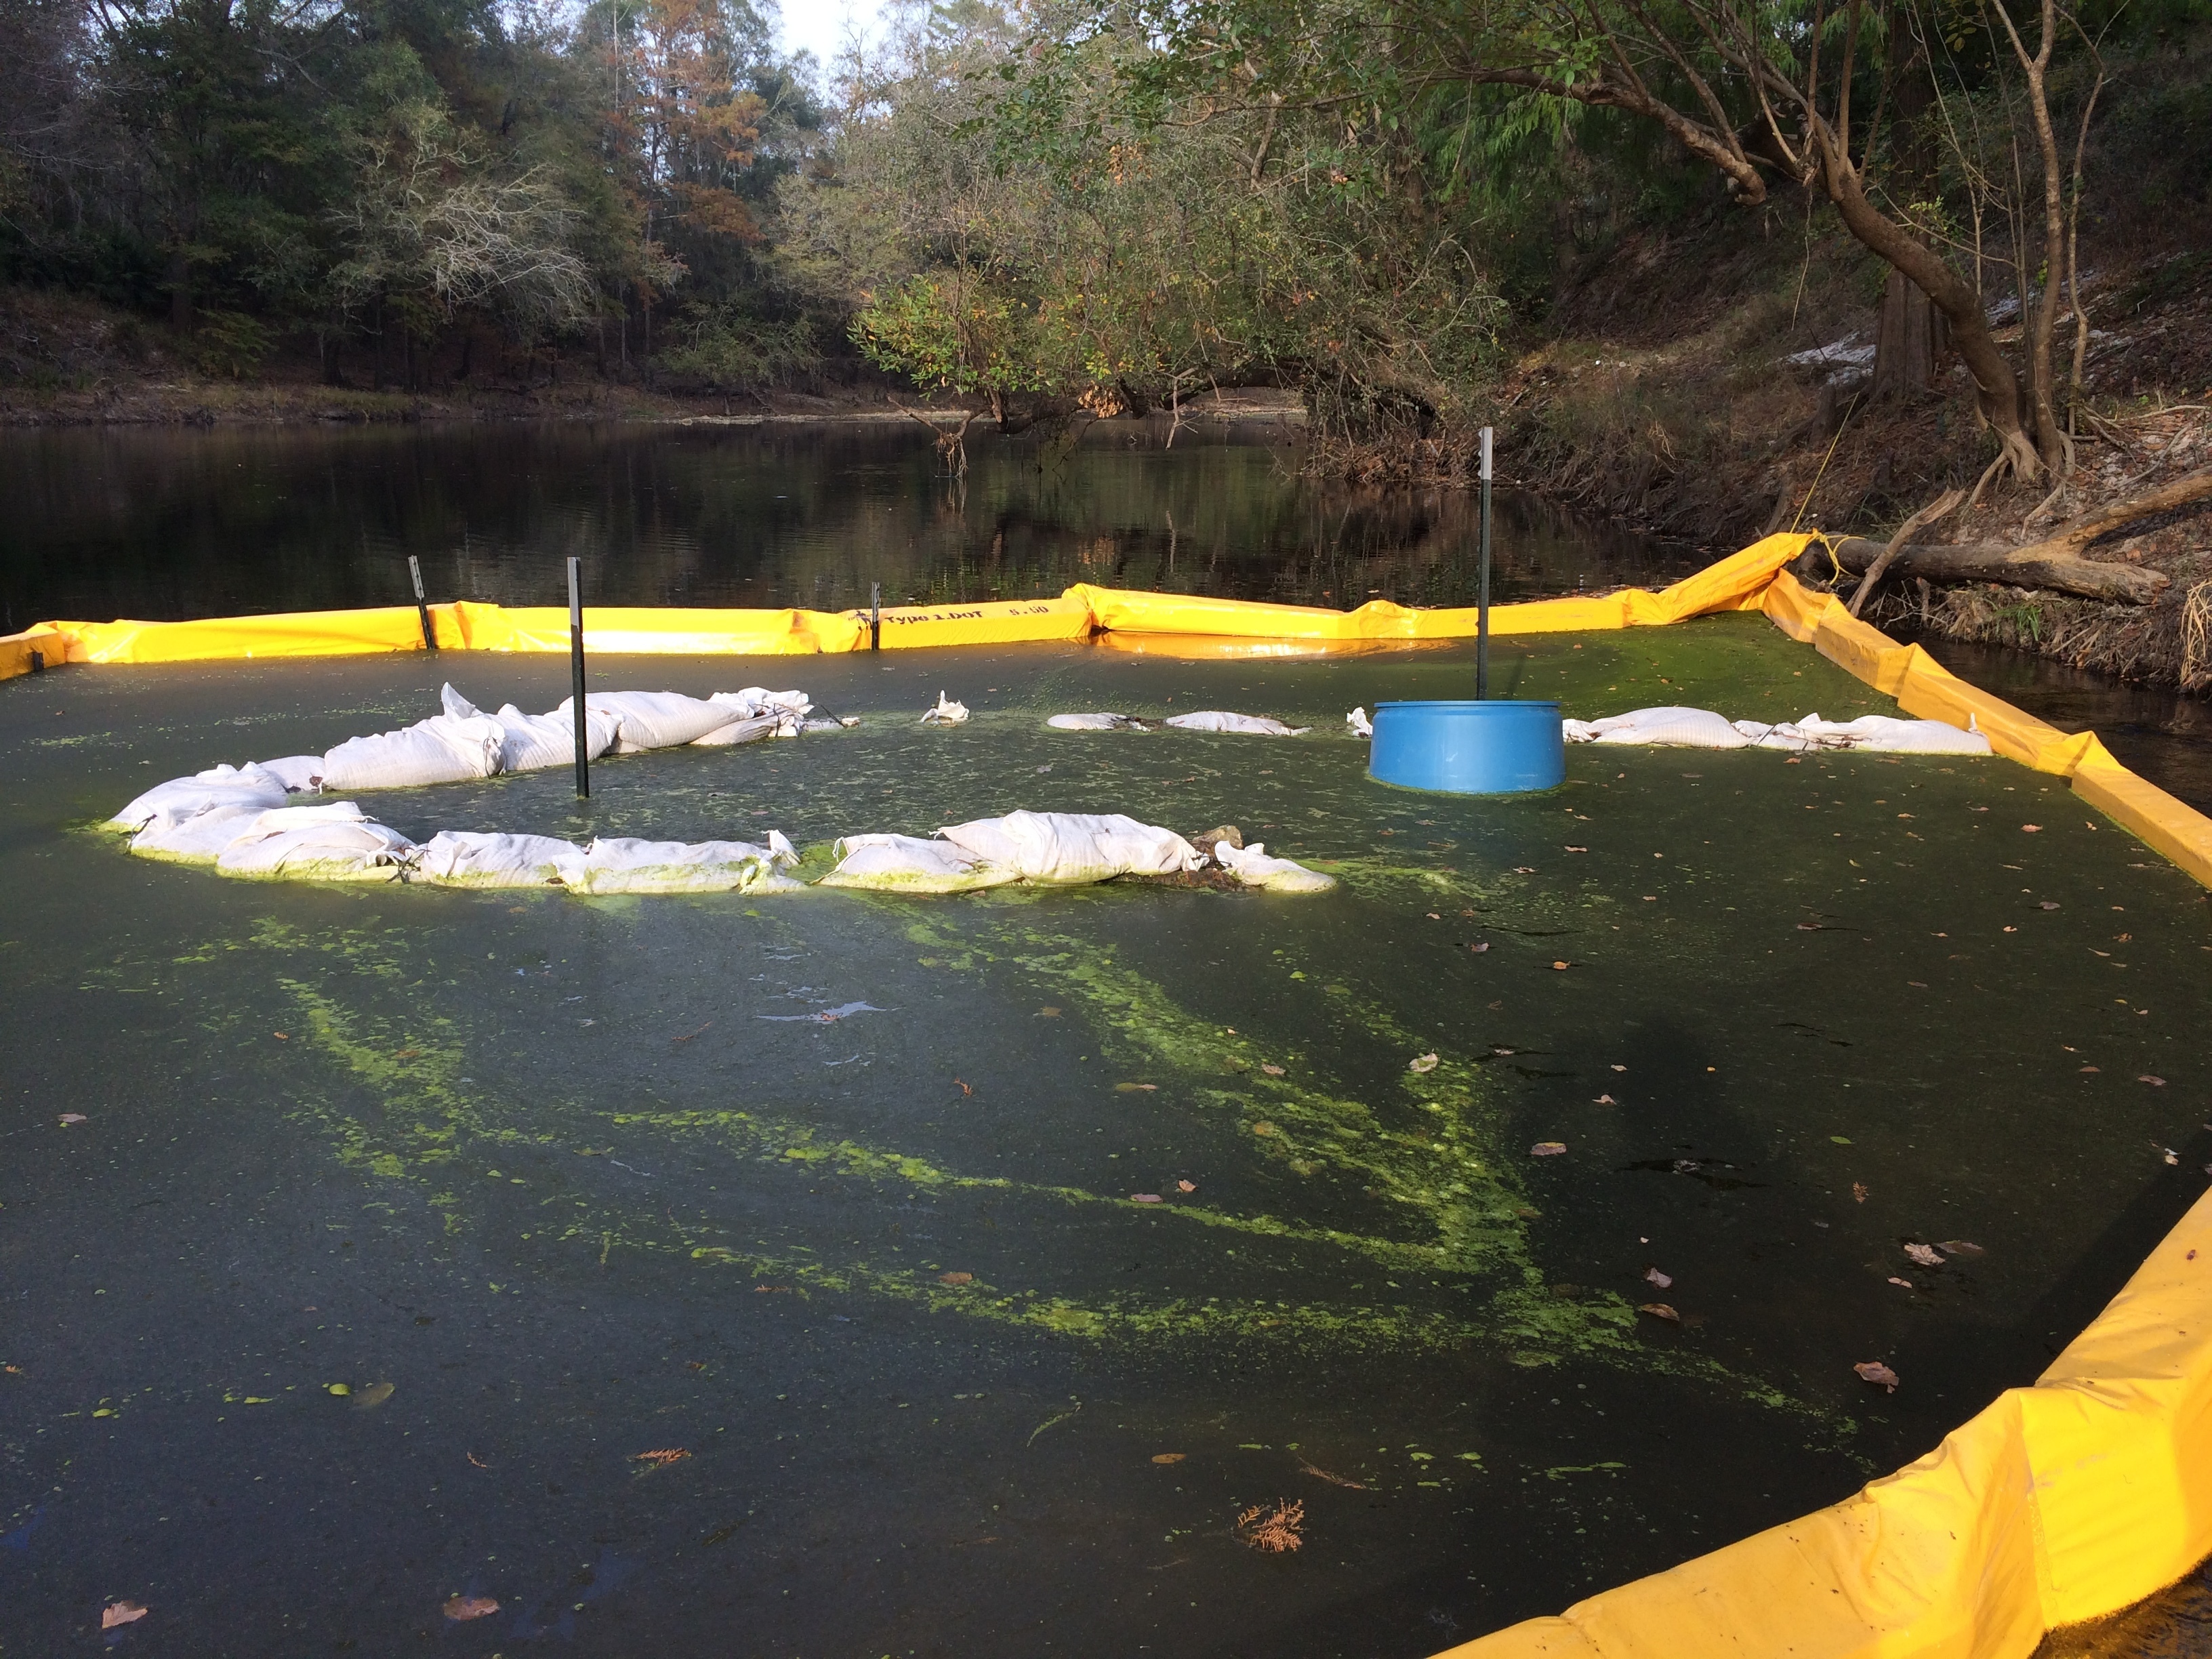 3264x2448 That is not normal Withlacoochee River water, in Sabal Trail still leaking drilling mud into the Withlacoochee River in GA, by Deanna Mericle, 12 November 2016